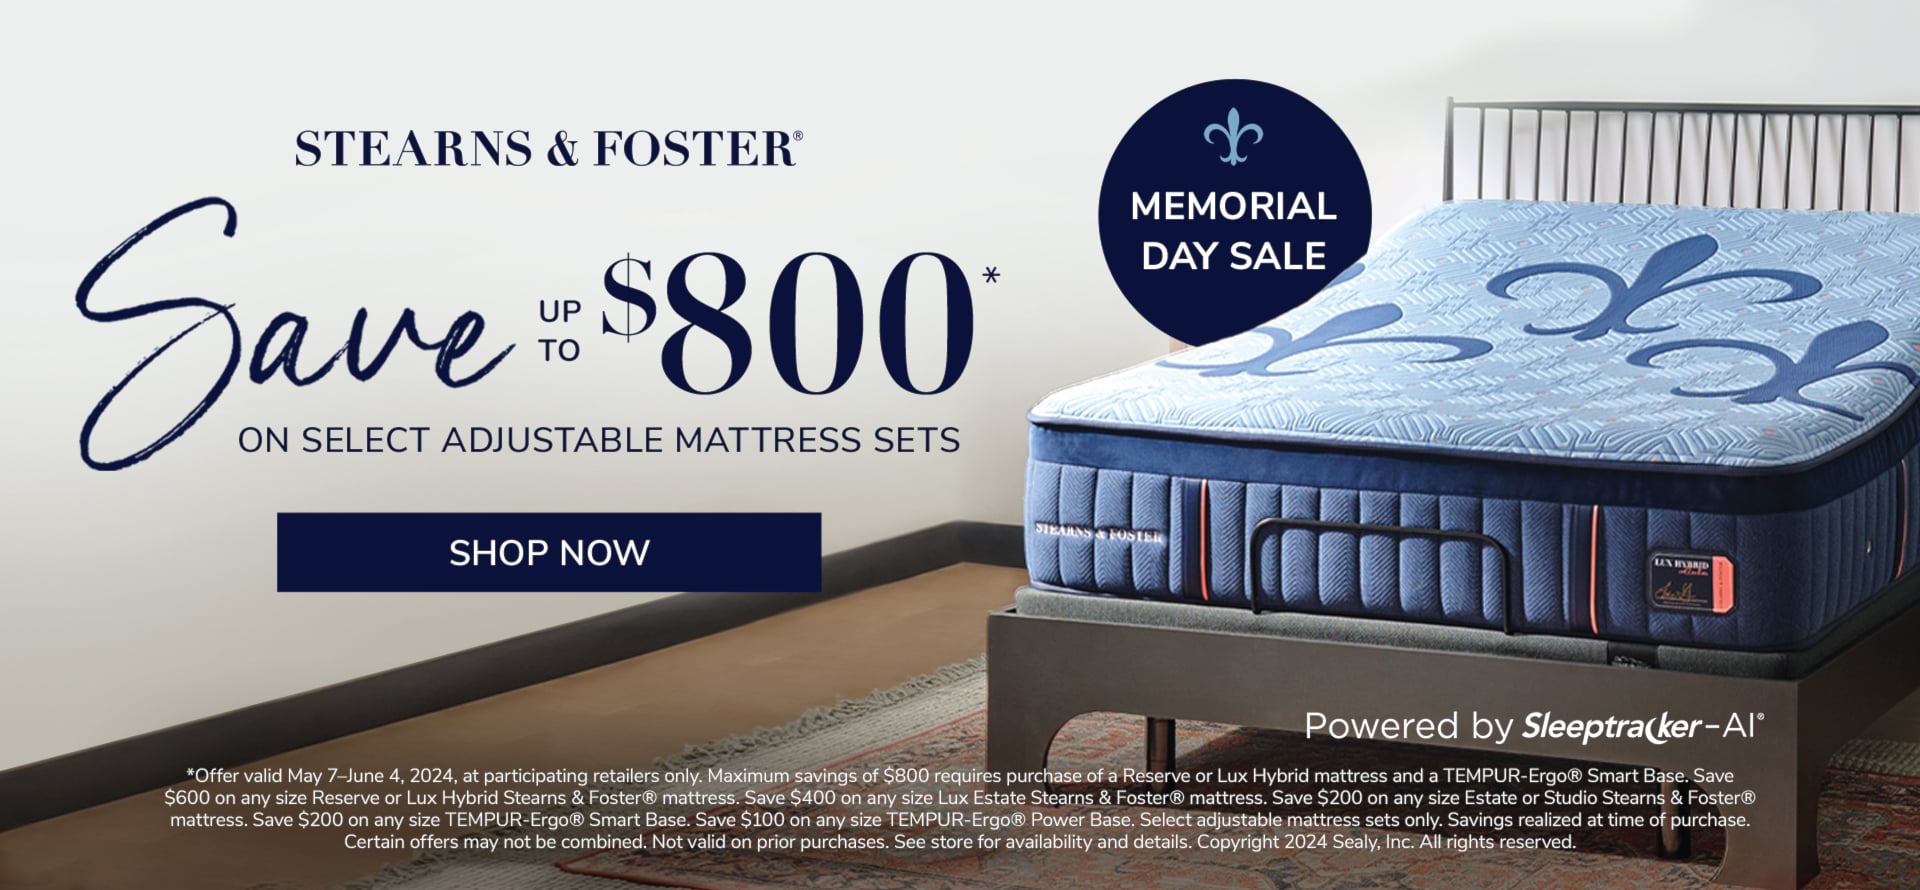 Save up to $800 on Select Stearns & Foster Adjustable Mattress Sets | Shop Now